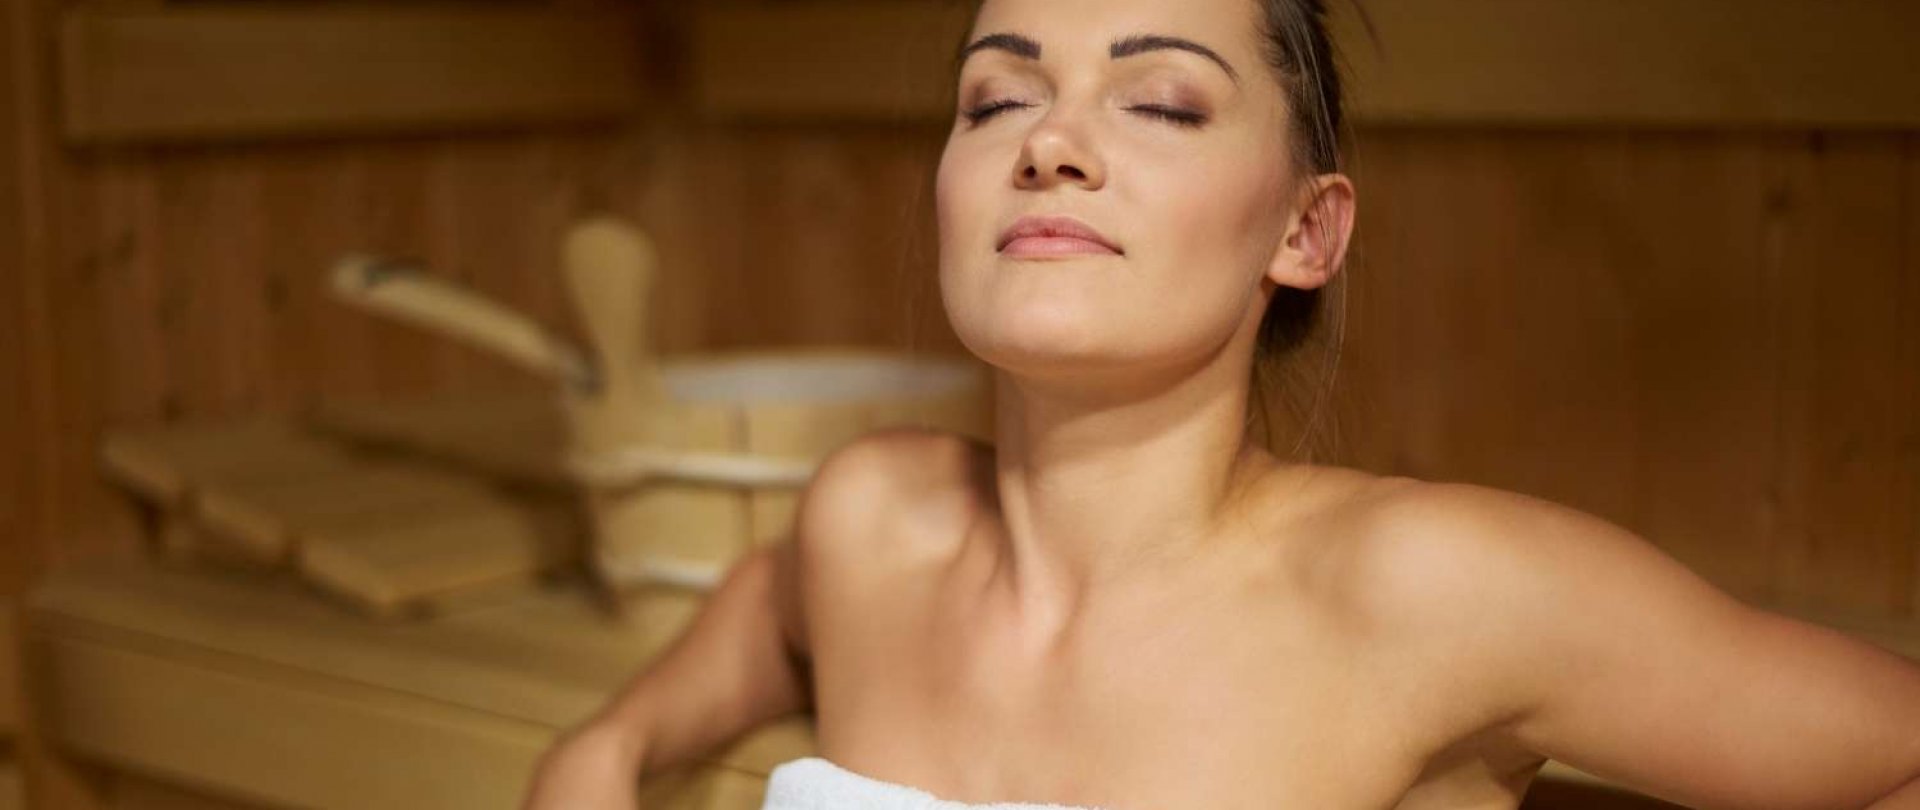 Sauna in the Hotel - How to Use It